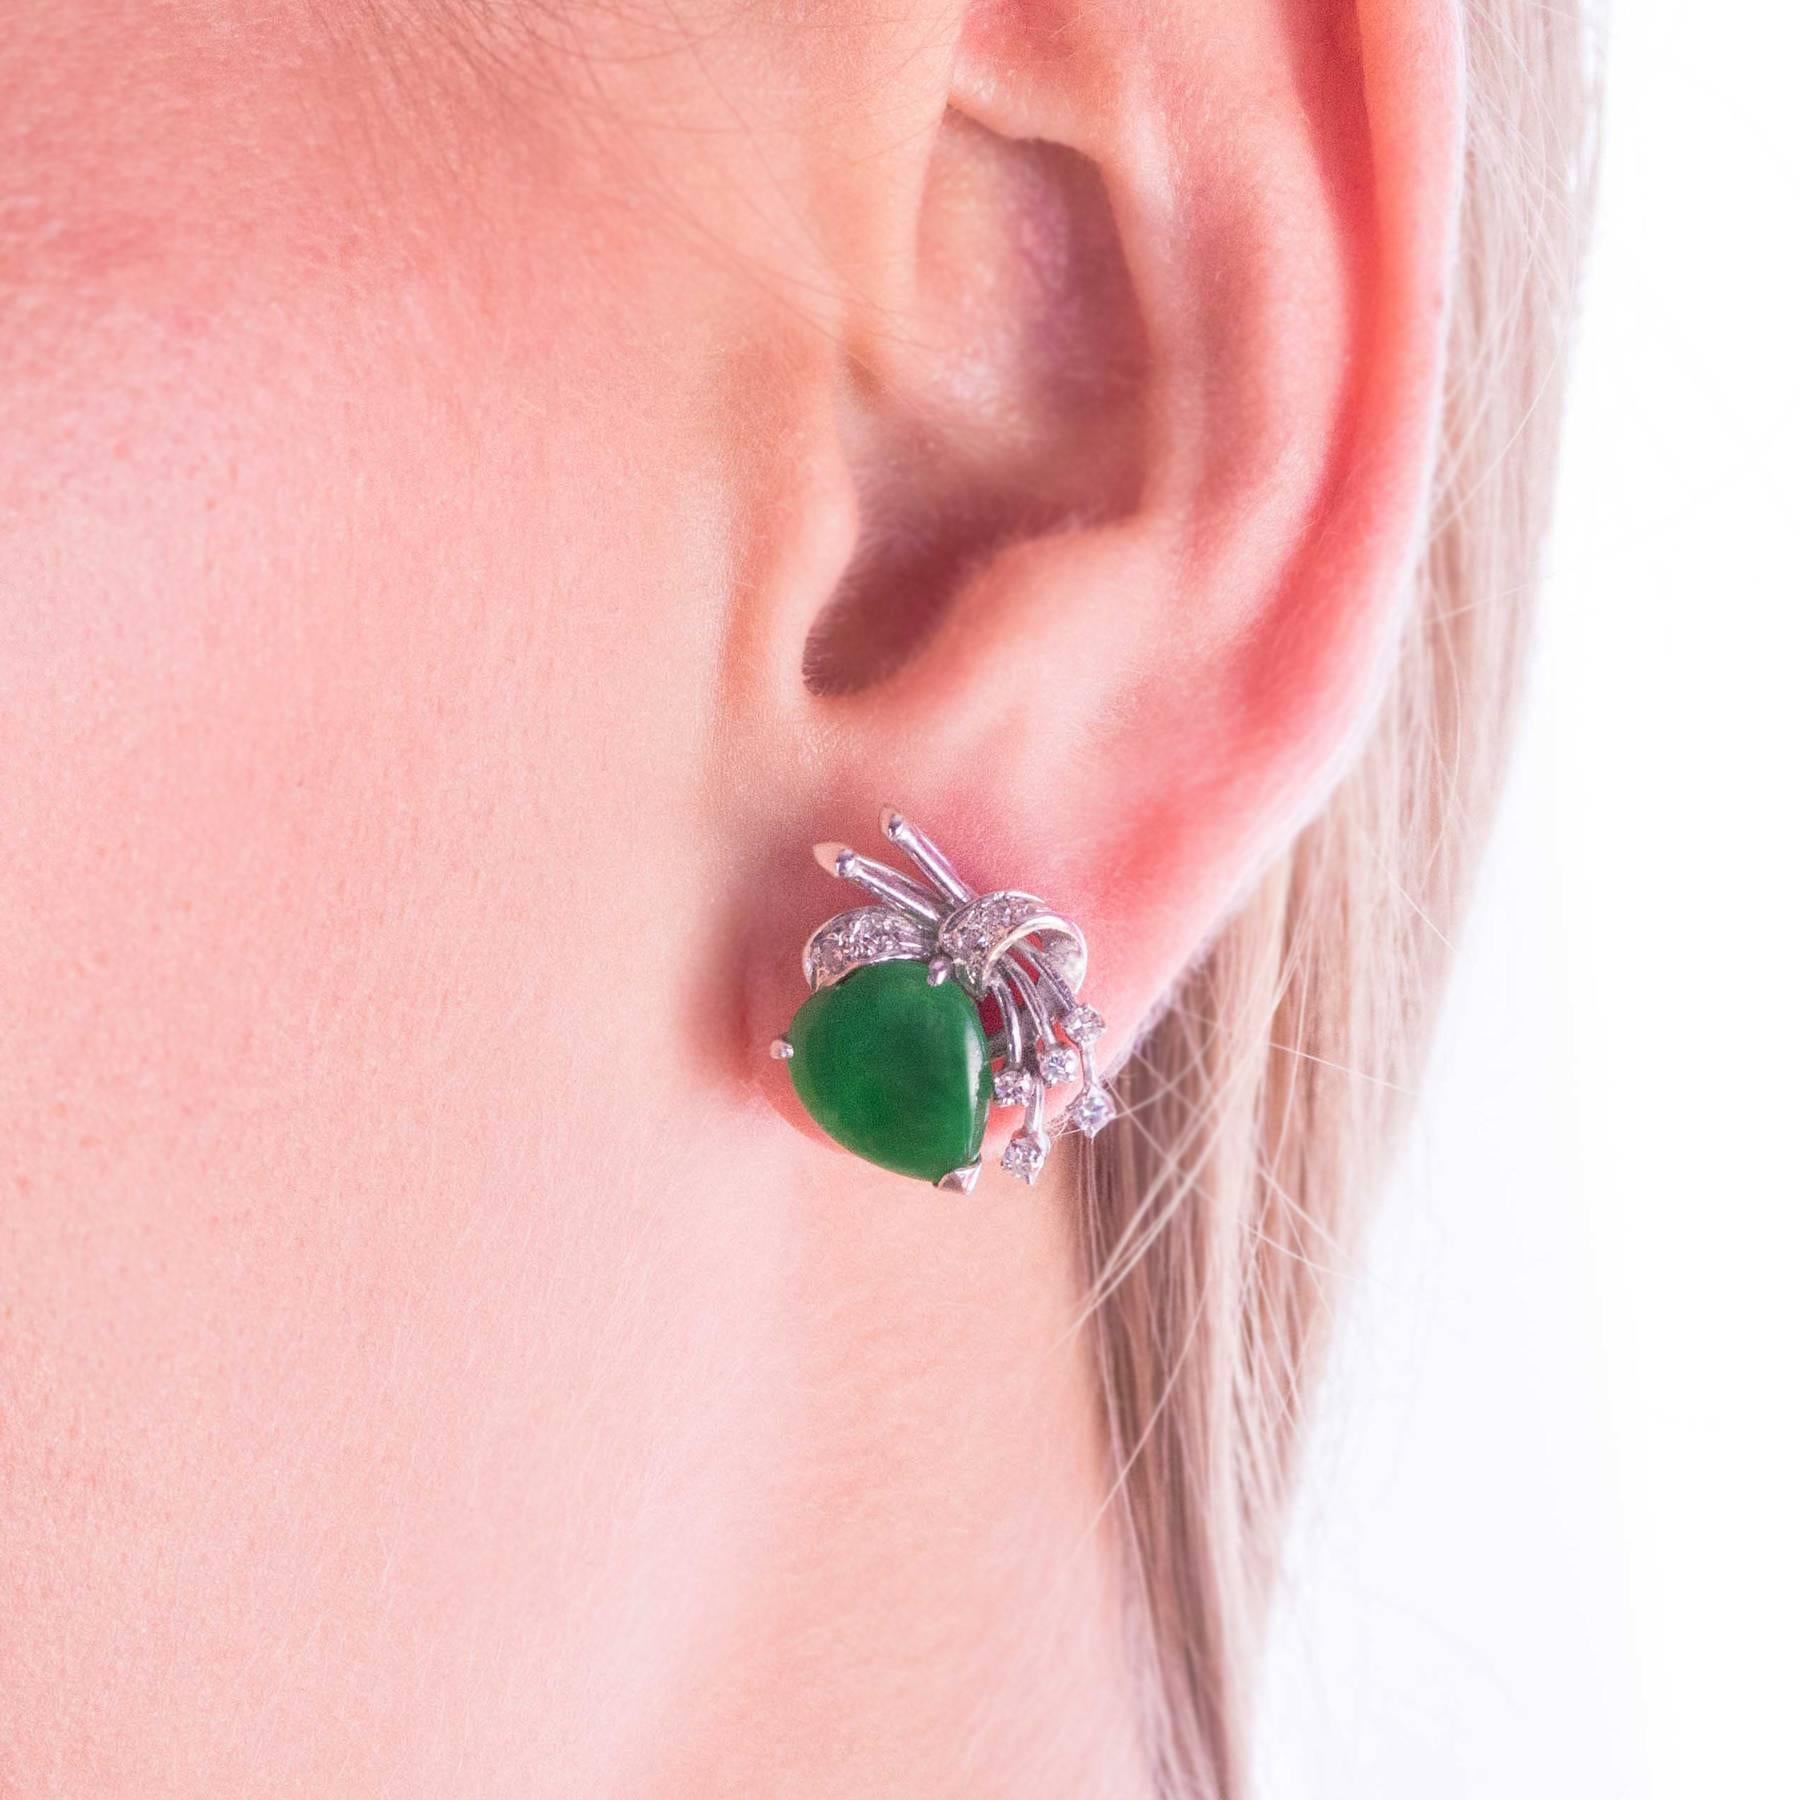 A pretty pair of Jadeite earrings are embellished with 18 single cut Diamonds and set in 18 Karat White Gold custom crafted mounts.

The earrings have Omega post clip retainers to keep them sitting well on the ears.

CONDITION:  In overall excellent